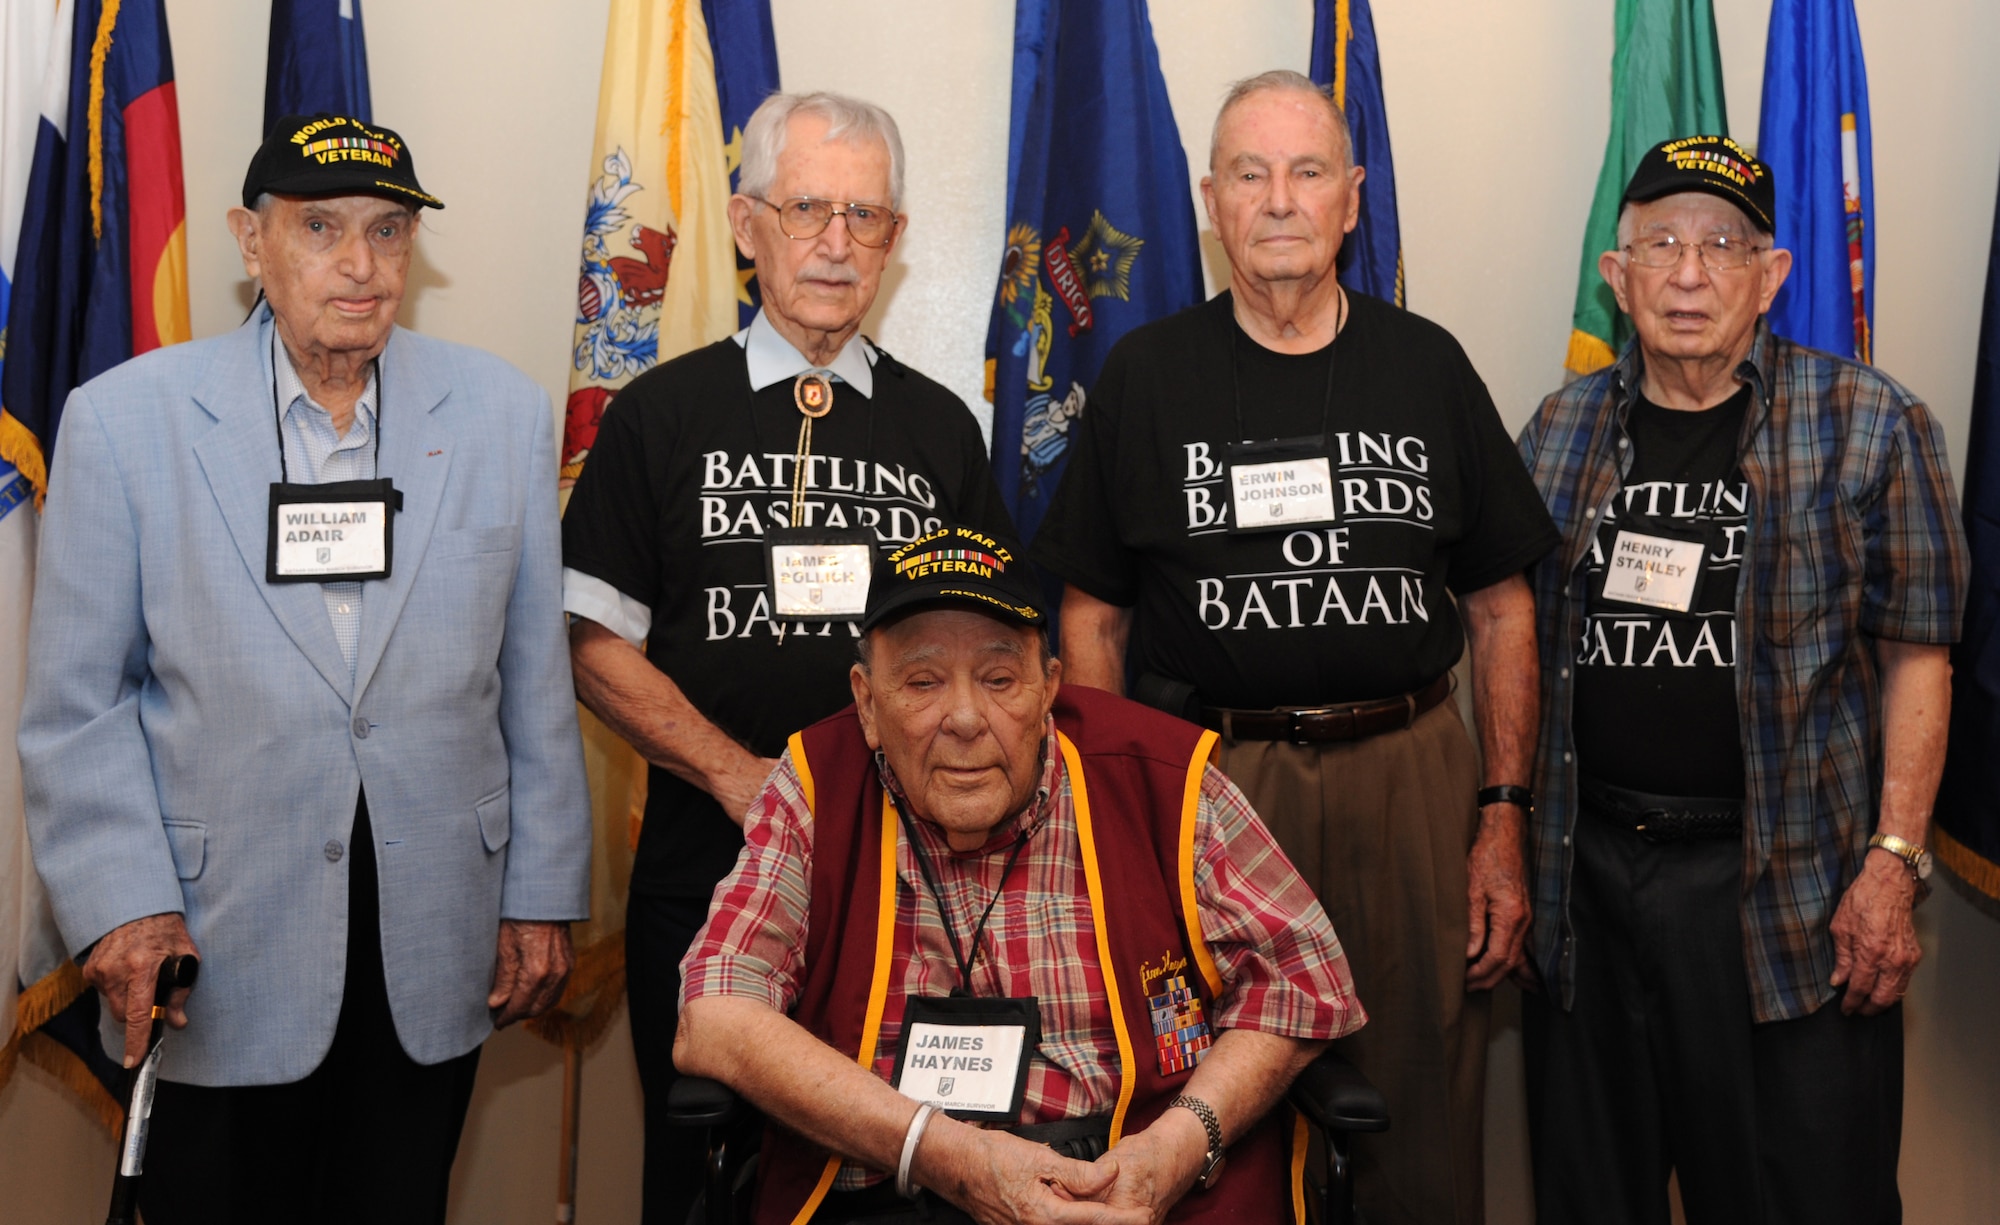 Bataan Death March survivors Capt. William Adair, Army of the U.S., Pvt. James Bollich, U.S. Army Air Force, Master Sgt. James Haynes, U.S. Army AF, Cpl. Erwin Johnson, U.S. Army AF, and Staff Sgt. Henry Stanley, U.S. Army AF, pose for a group photo during the 70th anniversary luncheon held in their honor on Barksdale Air Force Base, La., Sept. 4. The five veterans were given medals for their bravery and sacrifice they endured as prisoners of war during World War II. (U.S. Air Force photo/Airman 1st Class Joseph A. Pagán Jr.)(RELEASED)